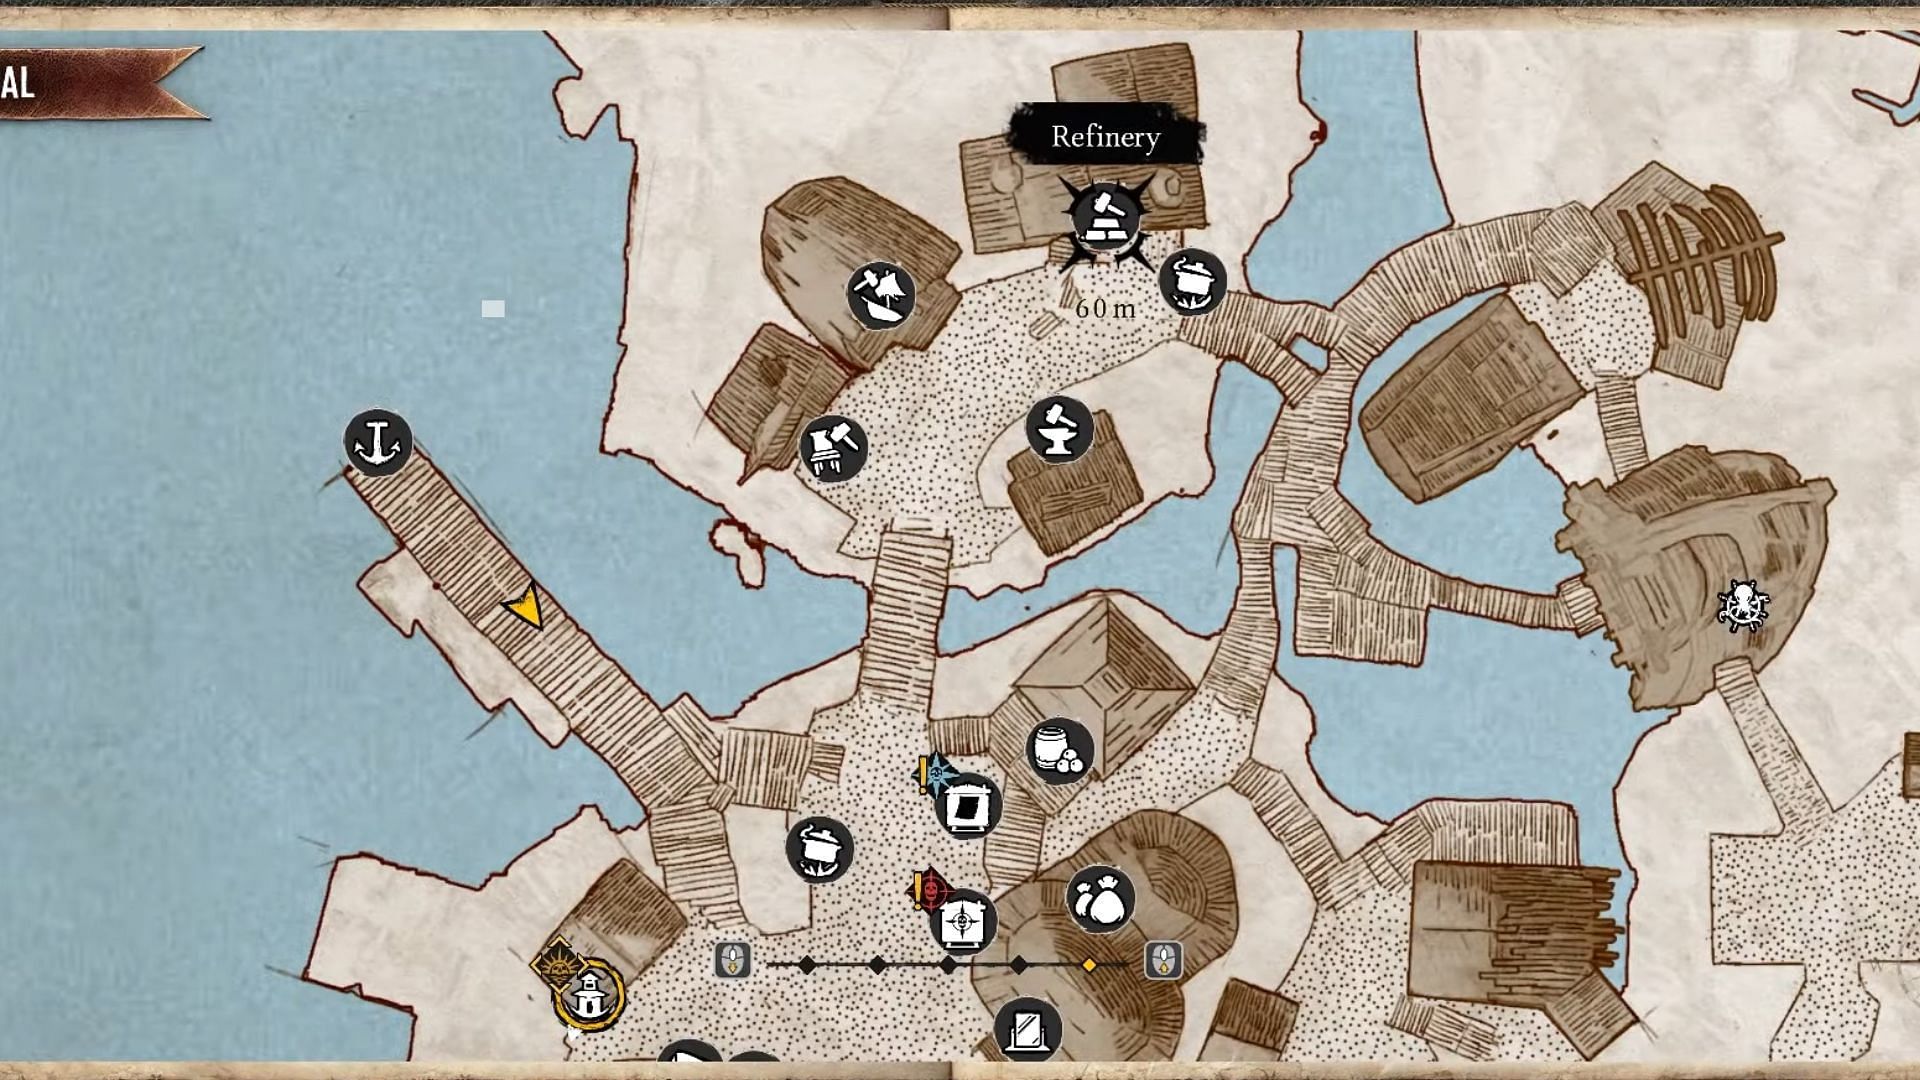 Refinery can be found in any Den. (Image via Ubisoft/ConCon on YouTube)